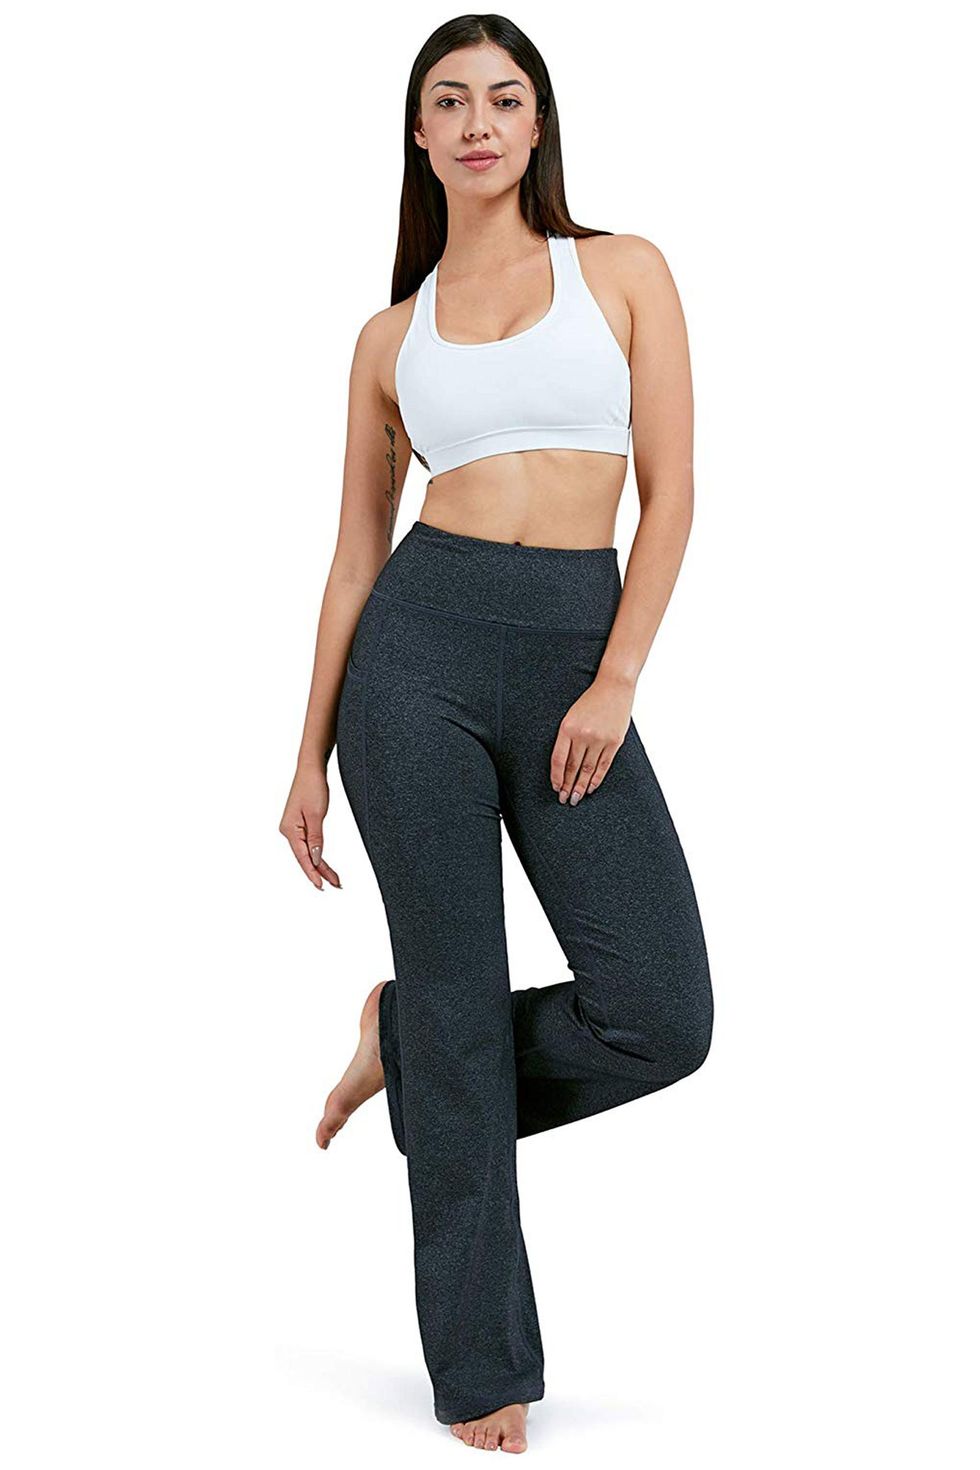 20 Cute Yoga Outfits - Best Yoga Apparel, Activewear 2020